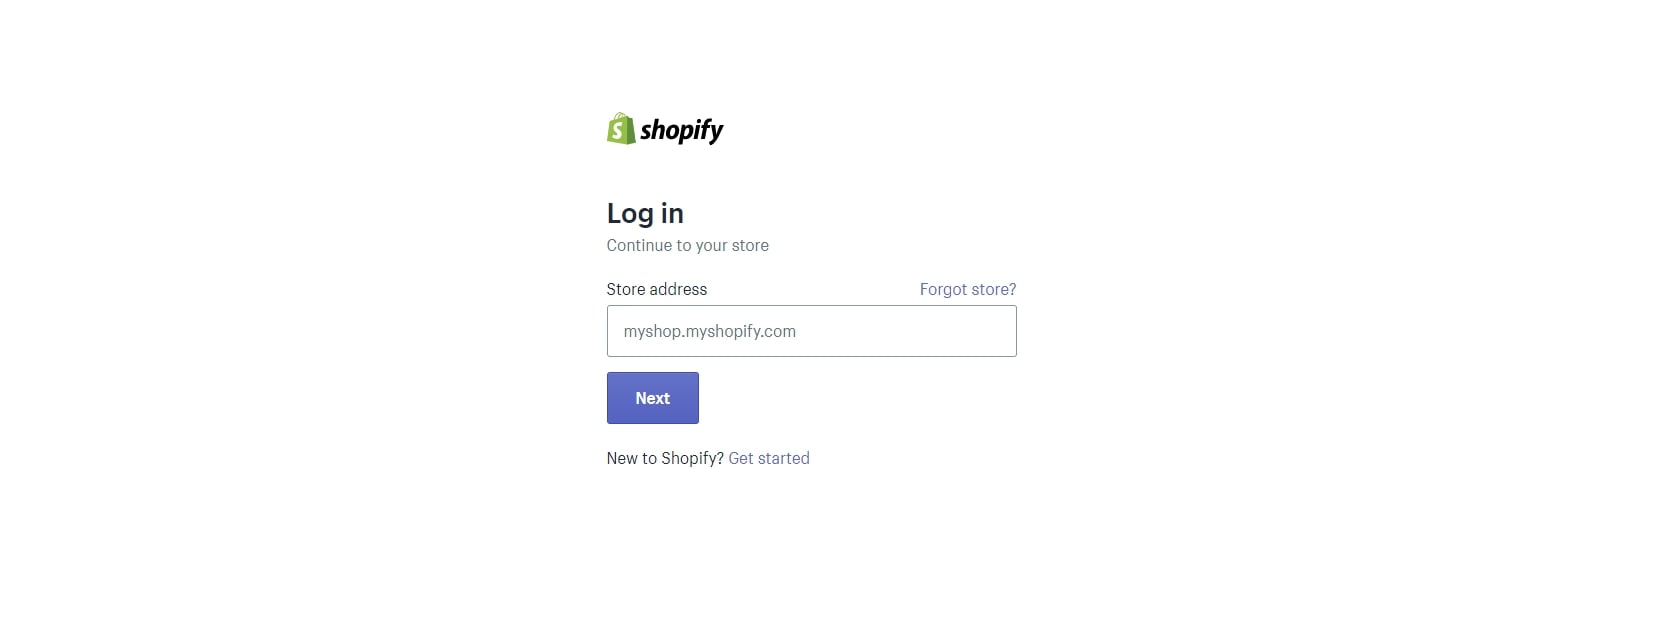 how to add trust badge under add to cart in the product page on Shopify